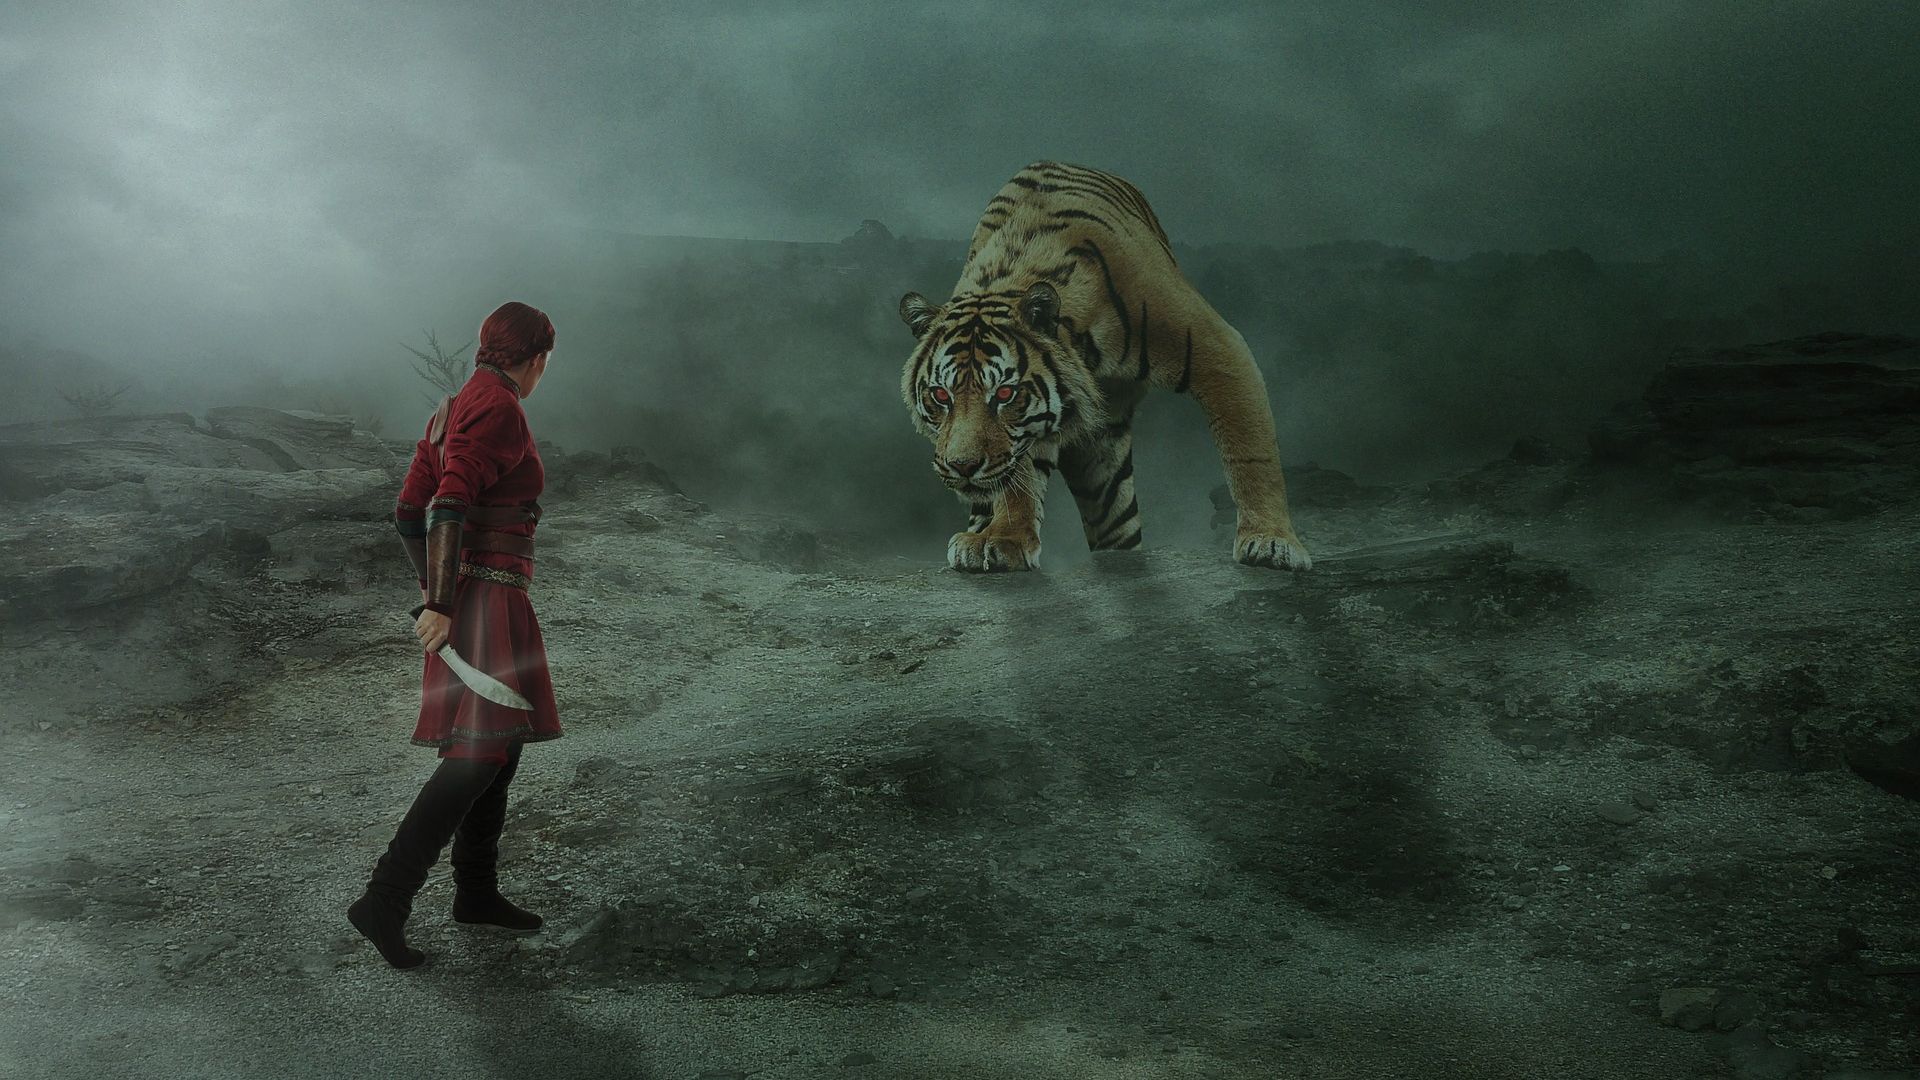 Tiger And Man Fight - HD Wallpaper 